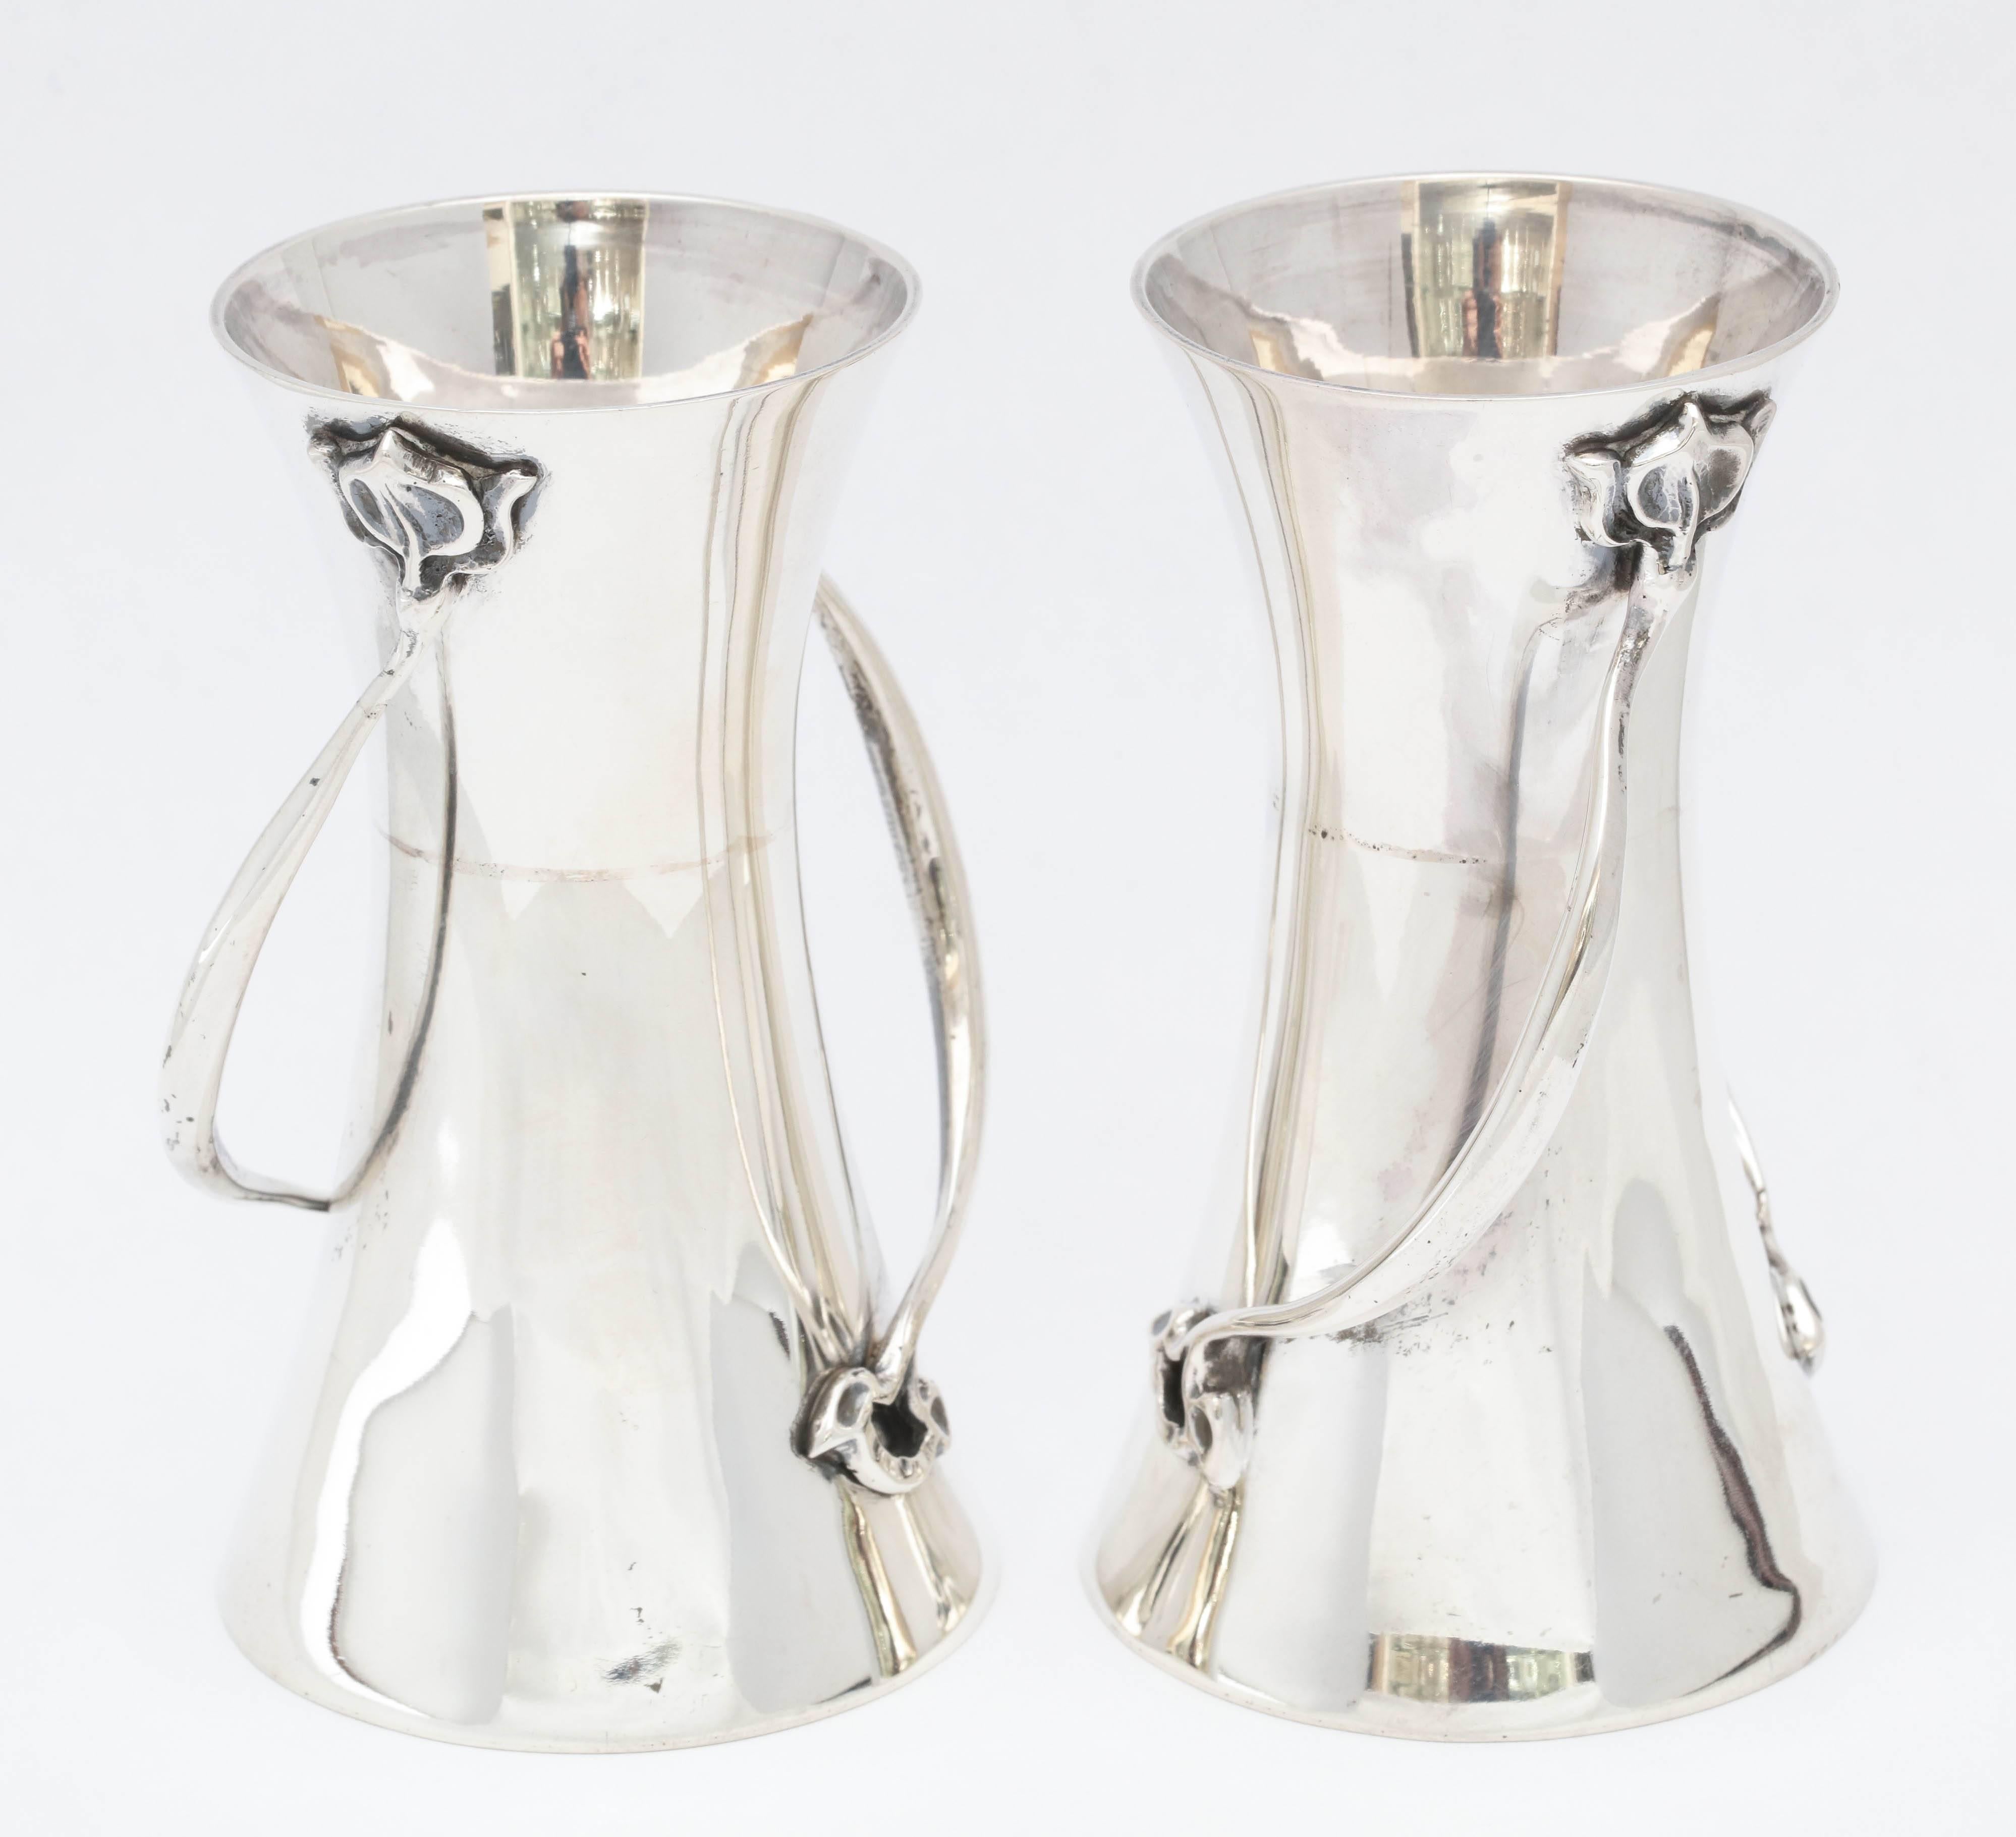 Rare Pair of Art Nouveau Sterling Silver Bud Vases 2